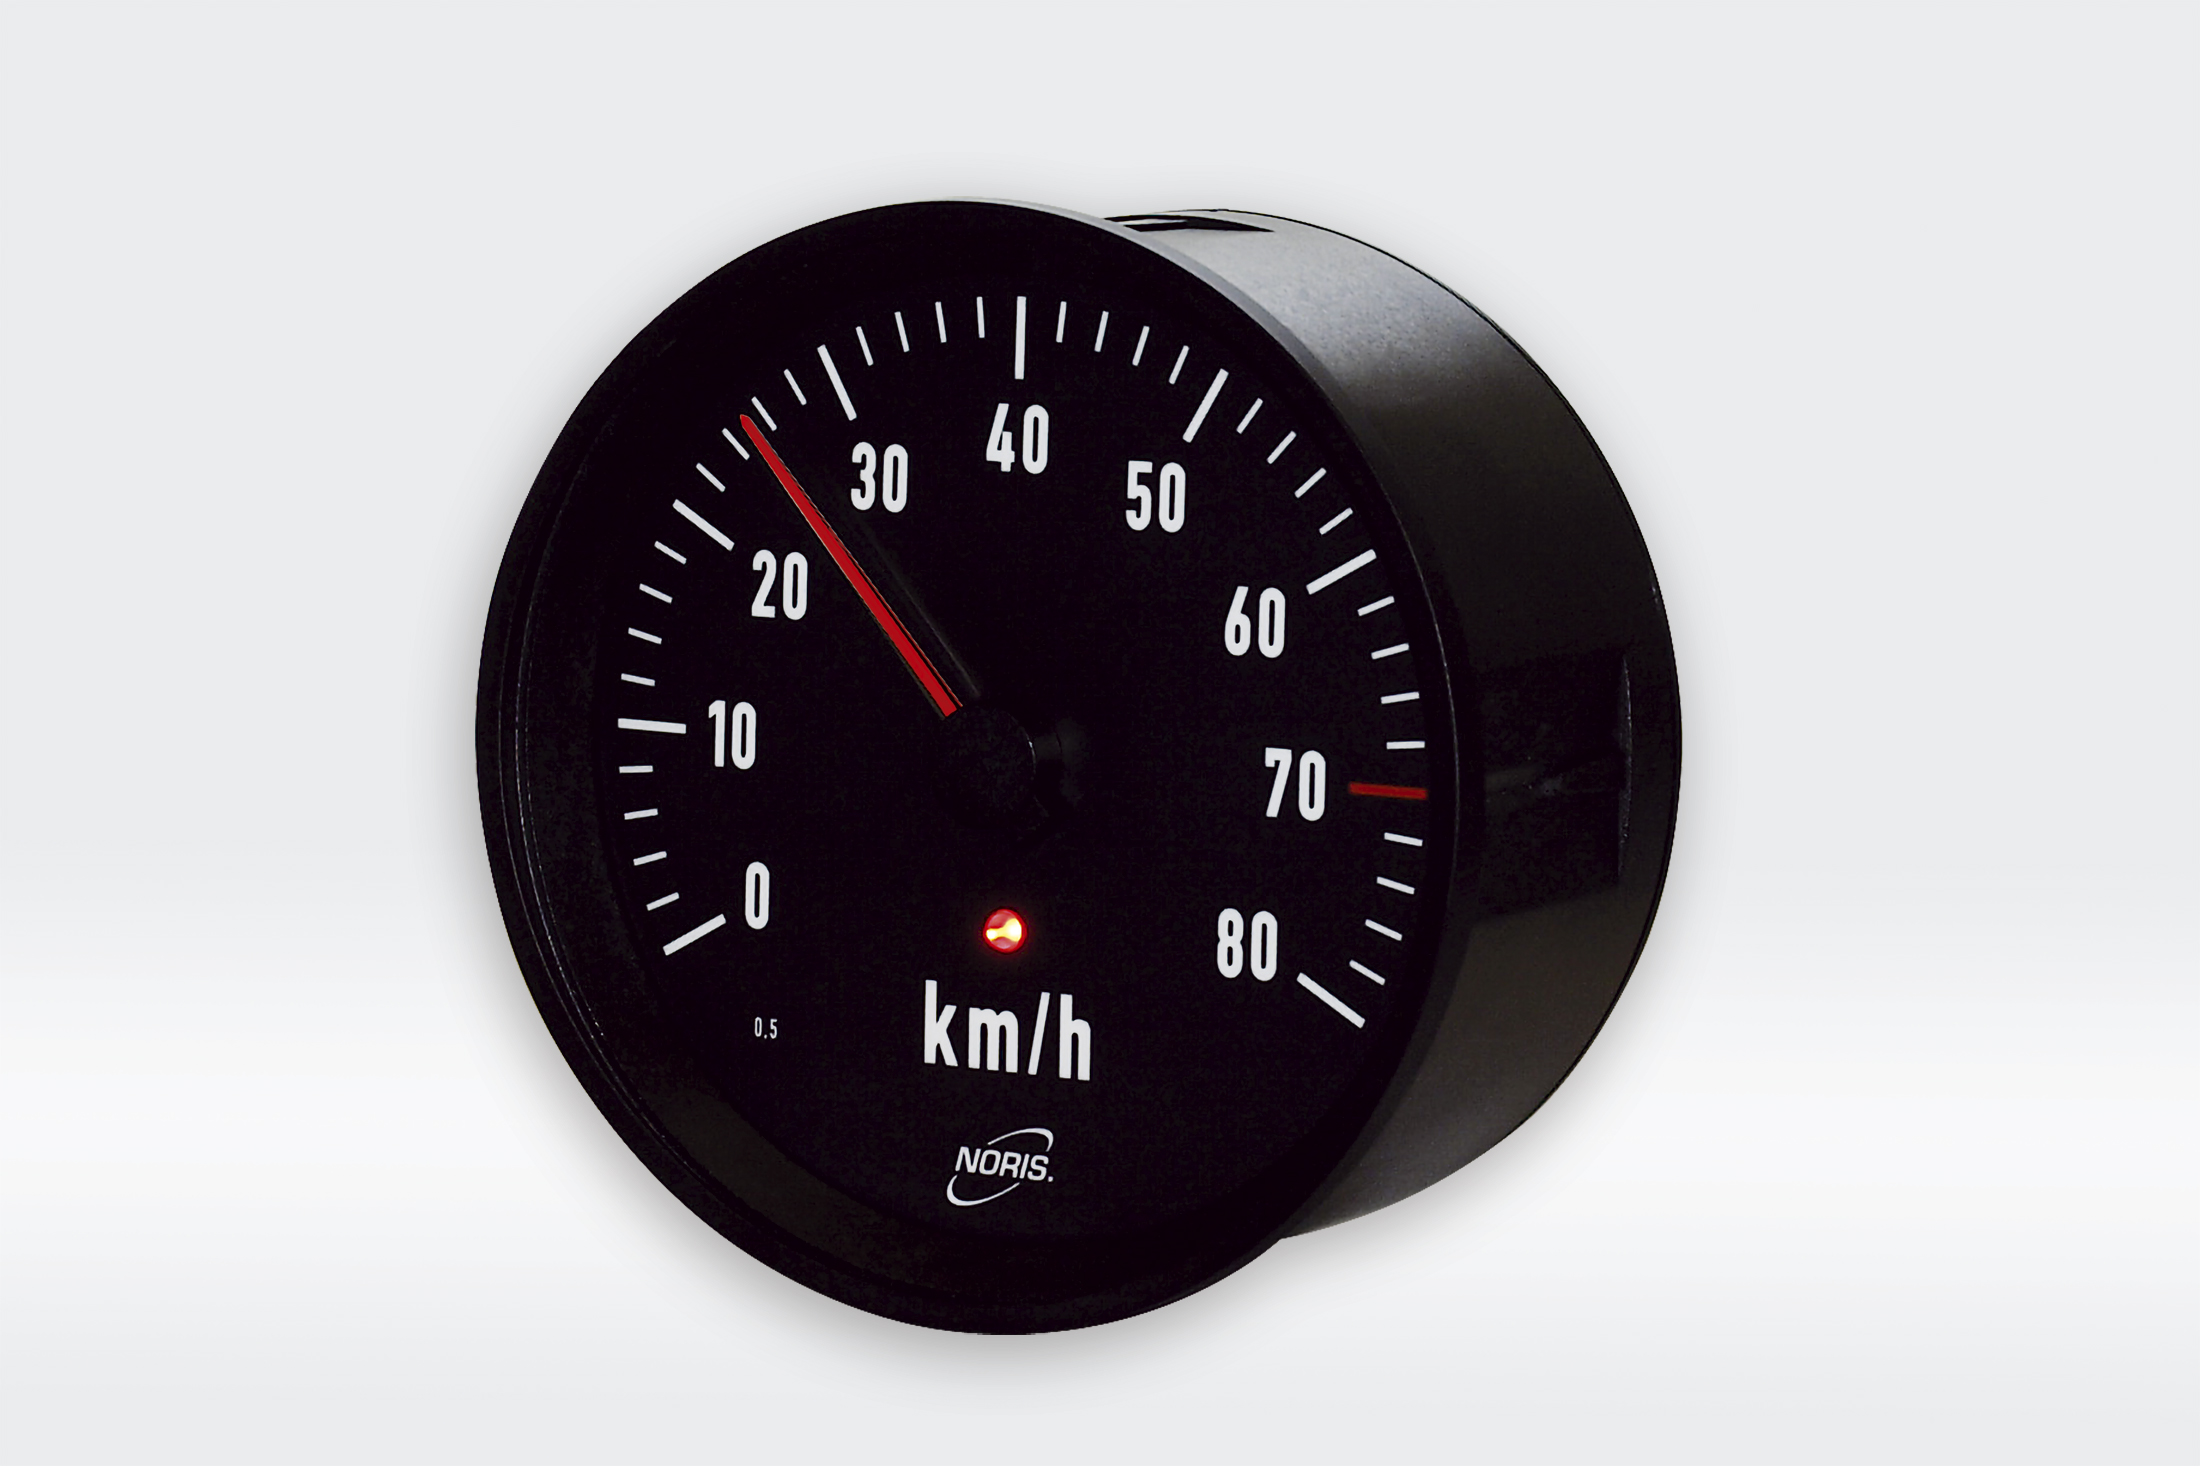 The image shows a round analogue indicator with integrated signalling led. The scale is black with white letters and a red pointer.